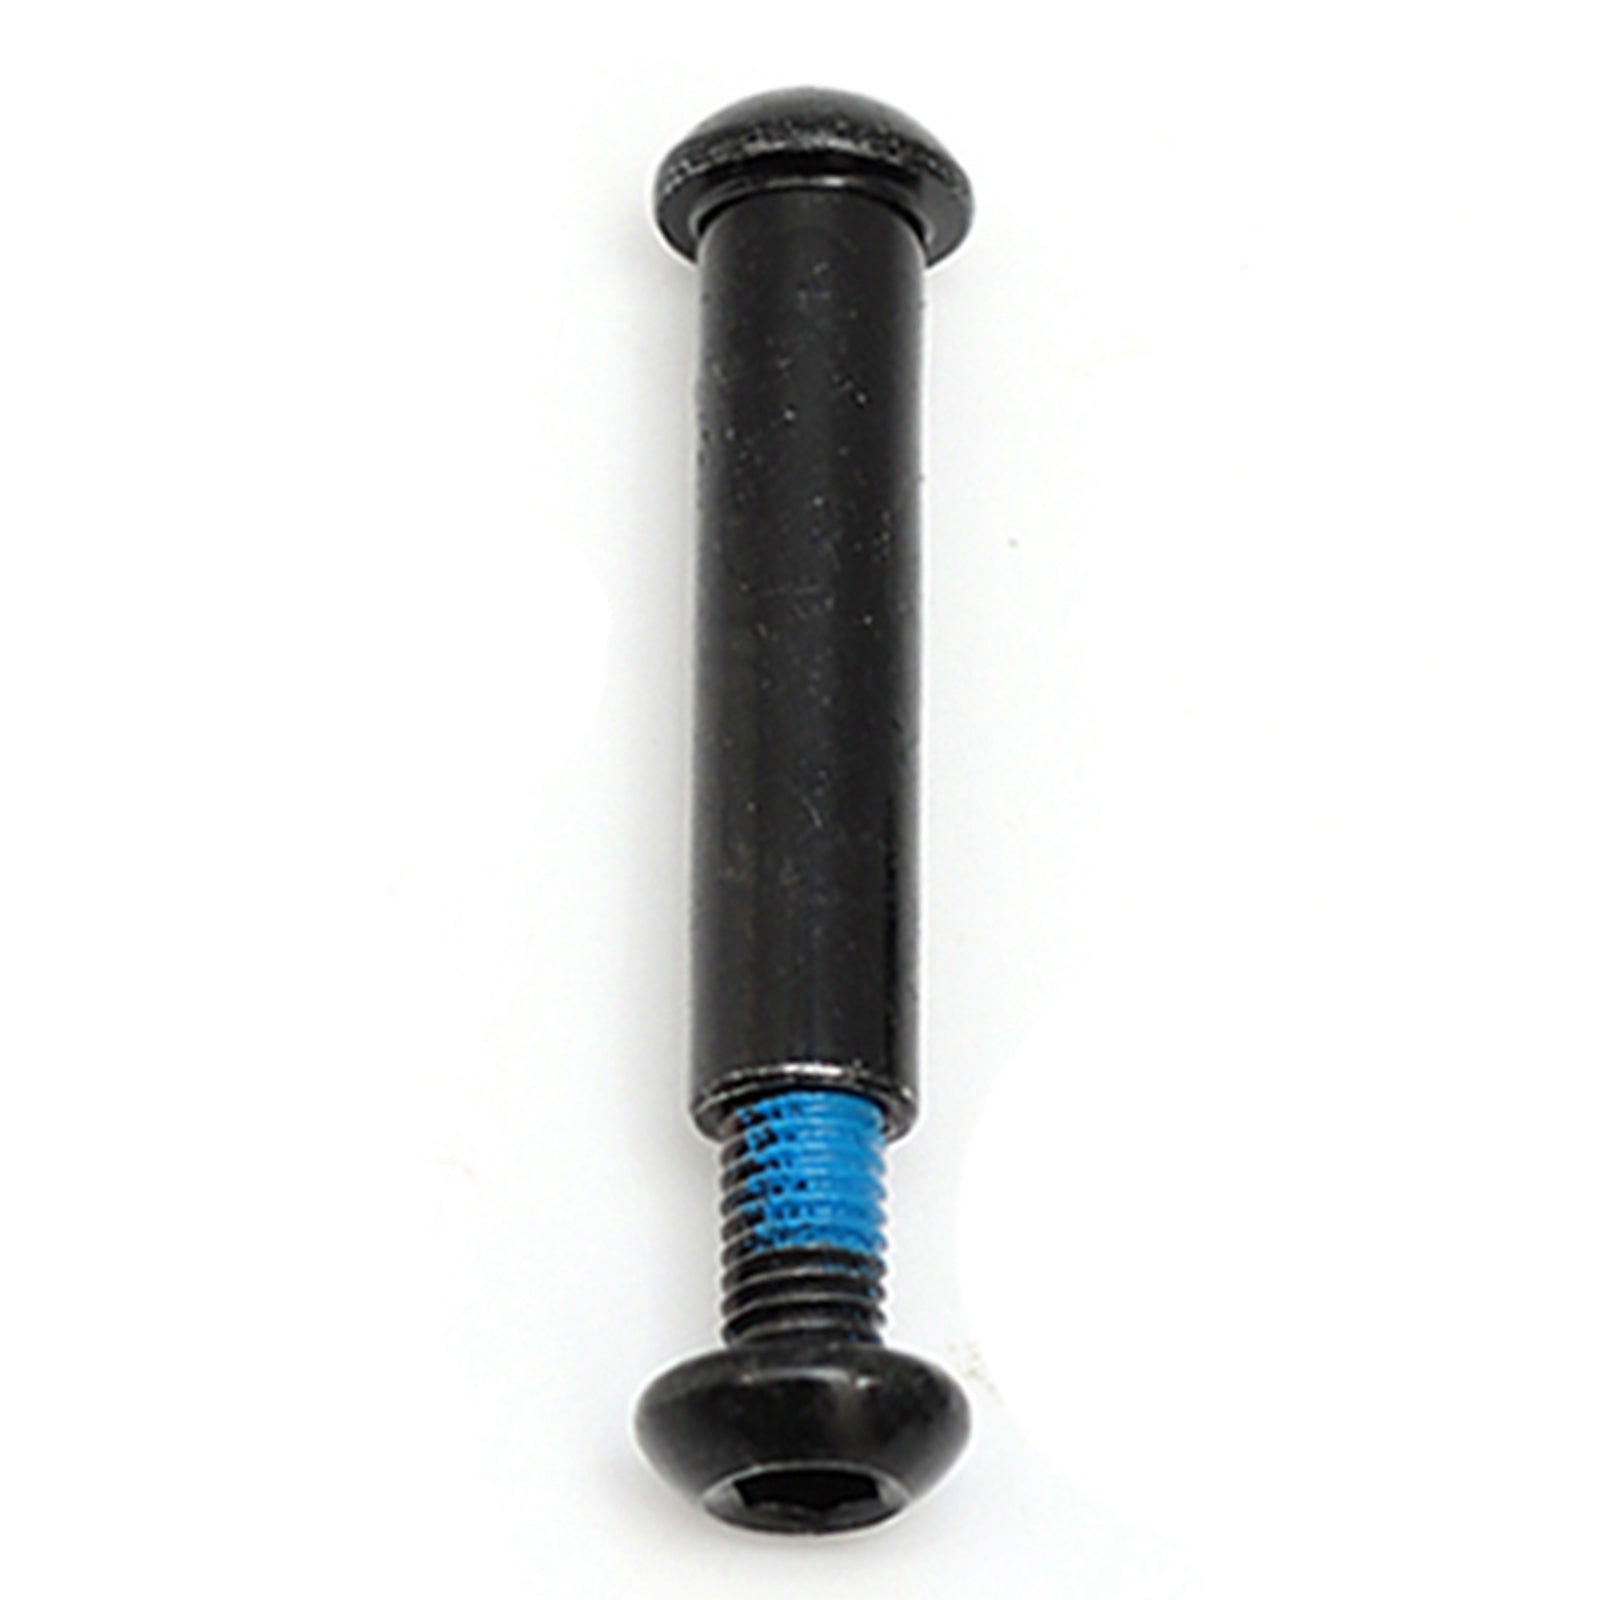 Uniqkart for Ninebot MAX G30 Electric Scooter Fold Base Fixed Bolt Replacement Screw Part - L